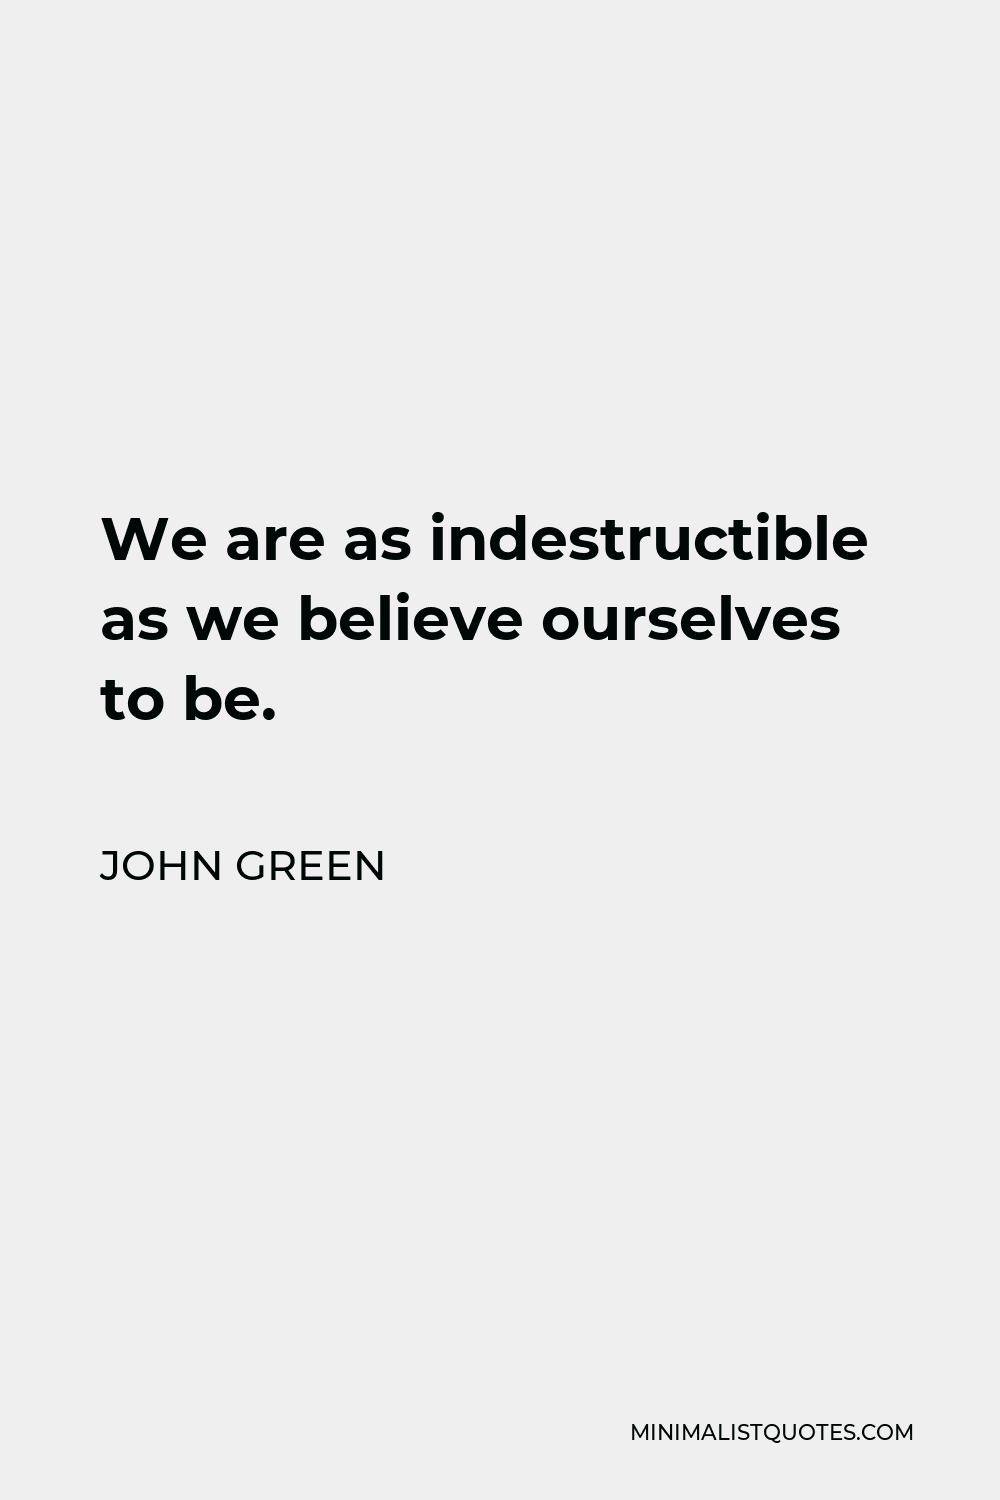 John Green Quote - We are as indestructible as we believe ourselves to be.